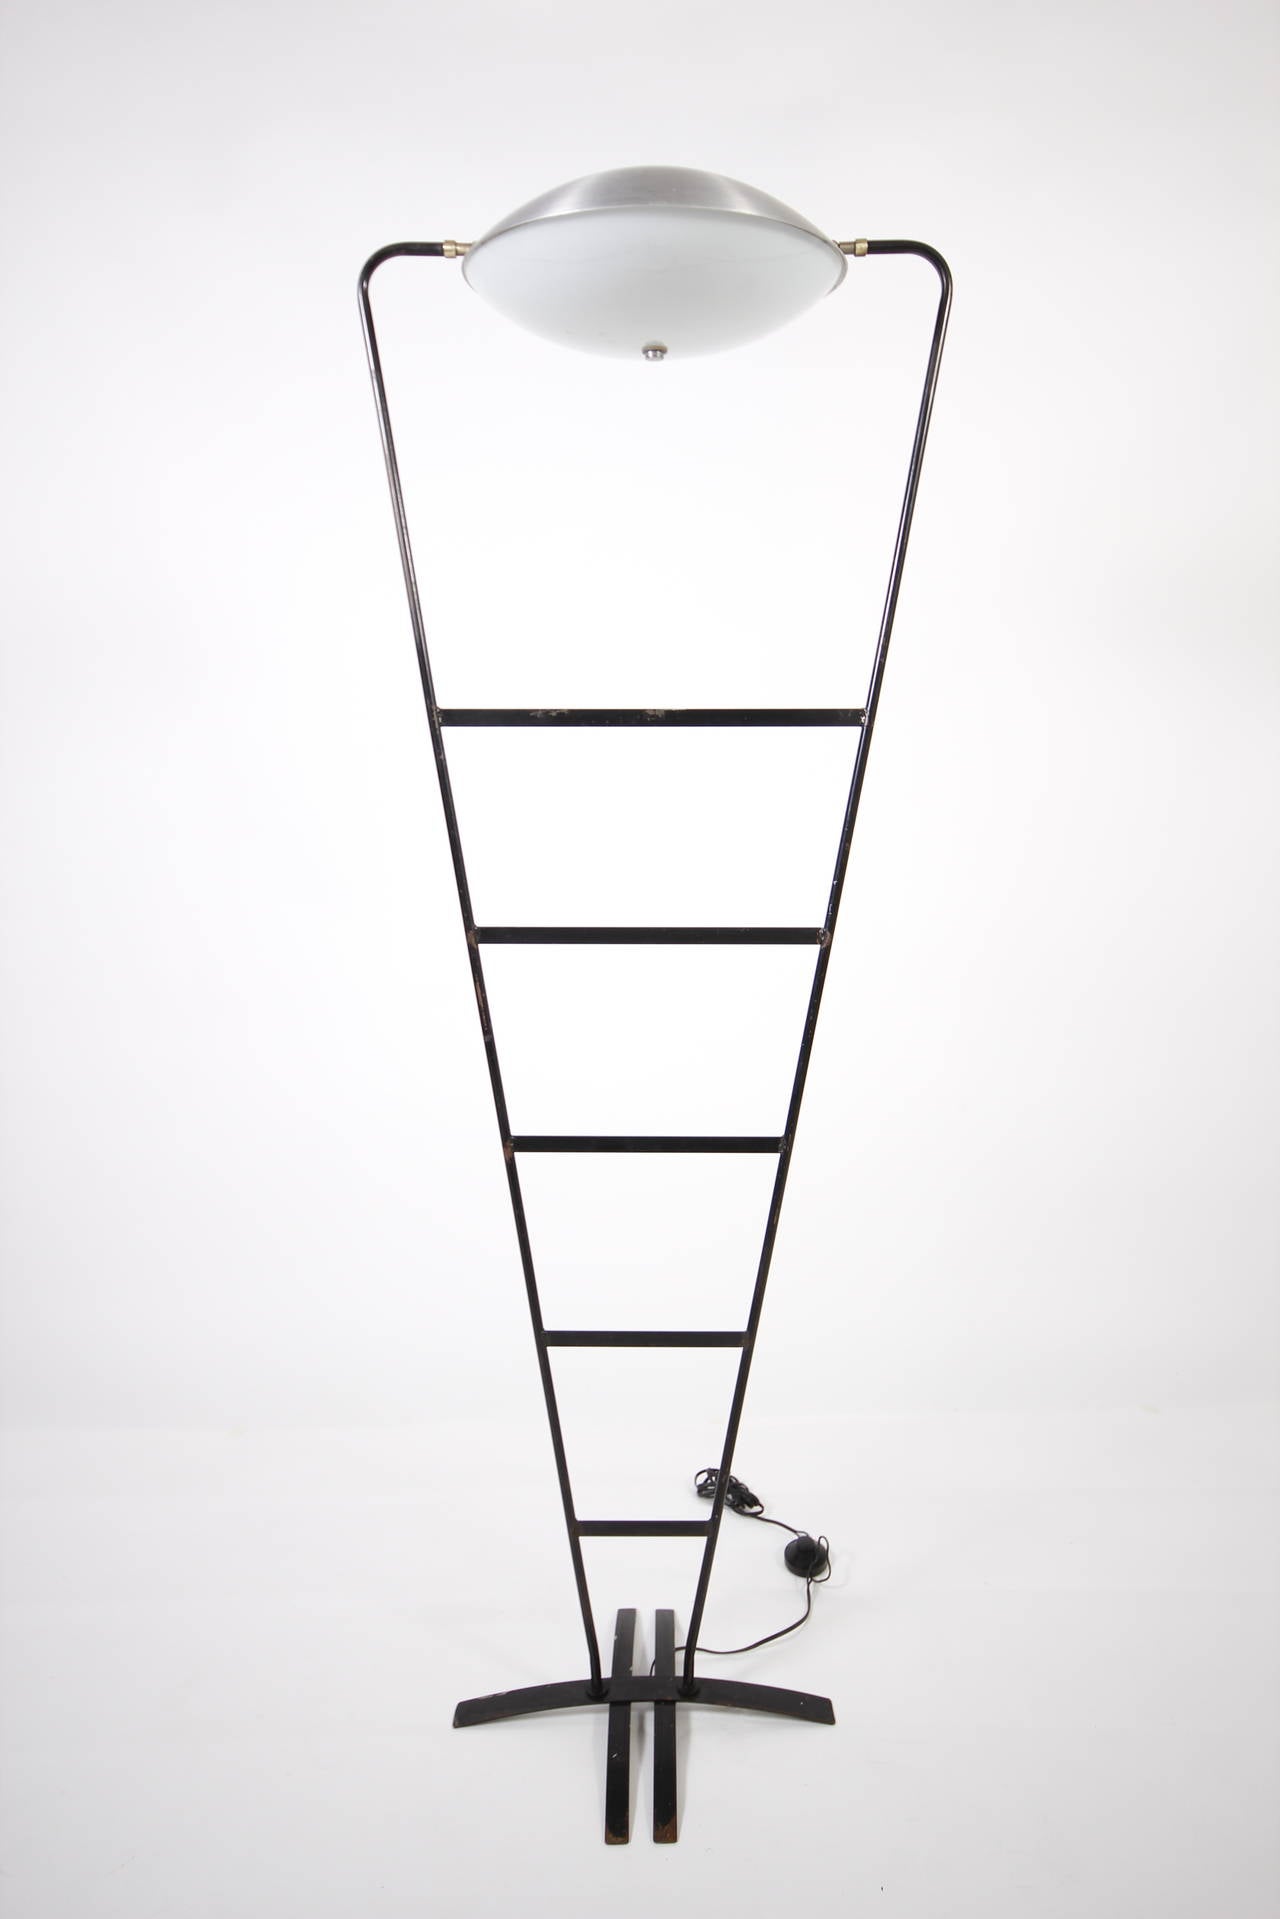 Very unusual modernist iron floor lamp in the manner of Jean Royère.